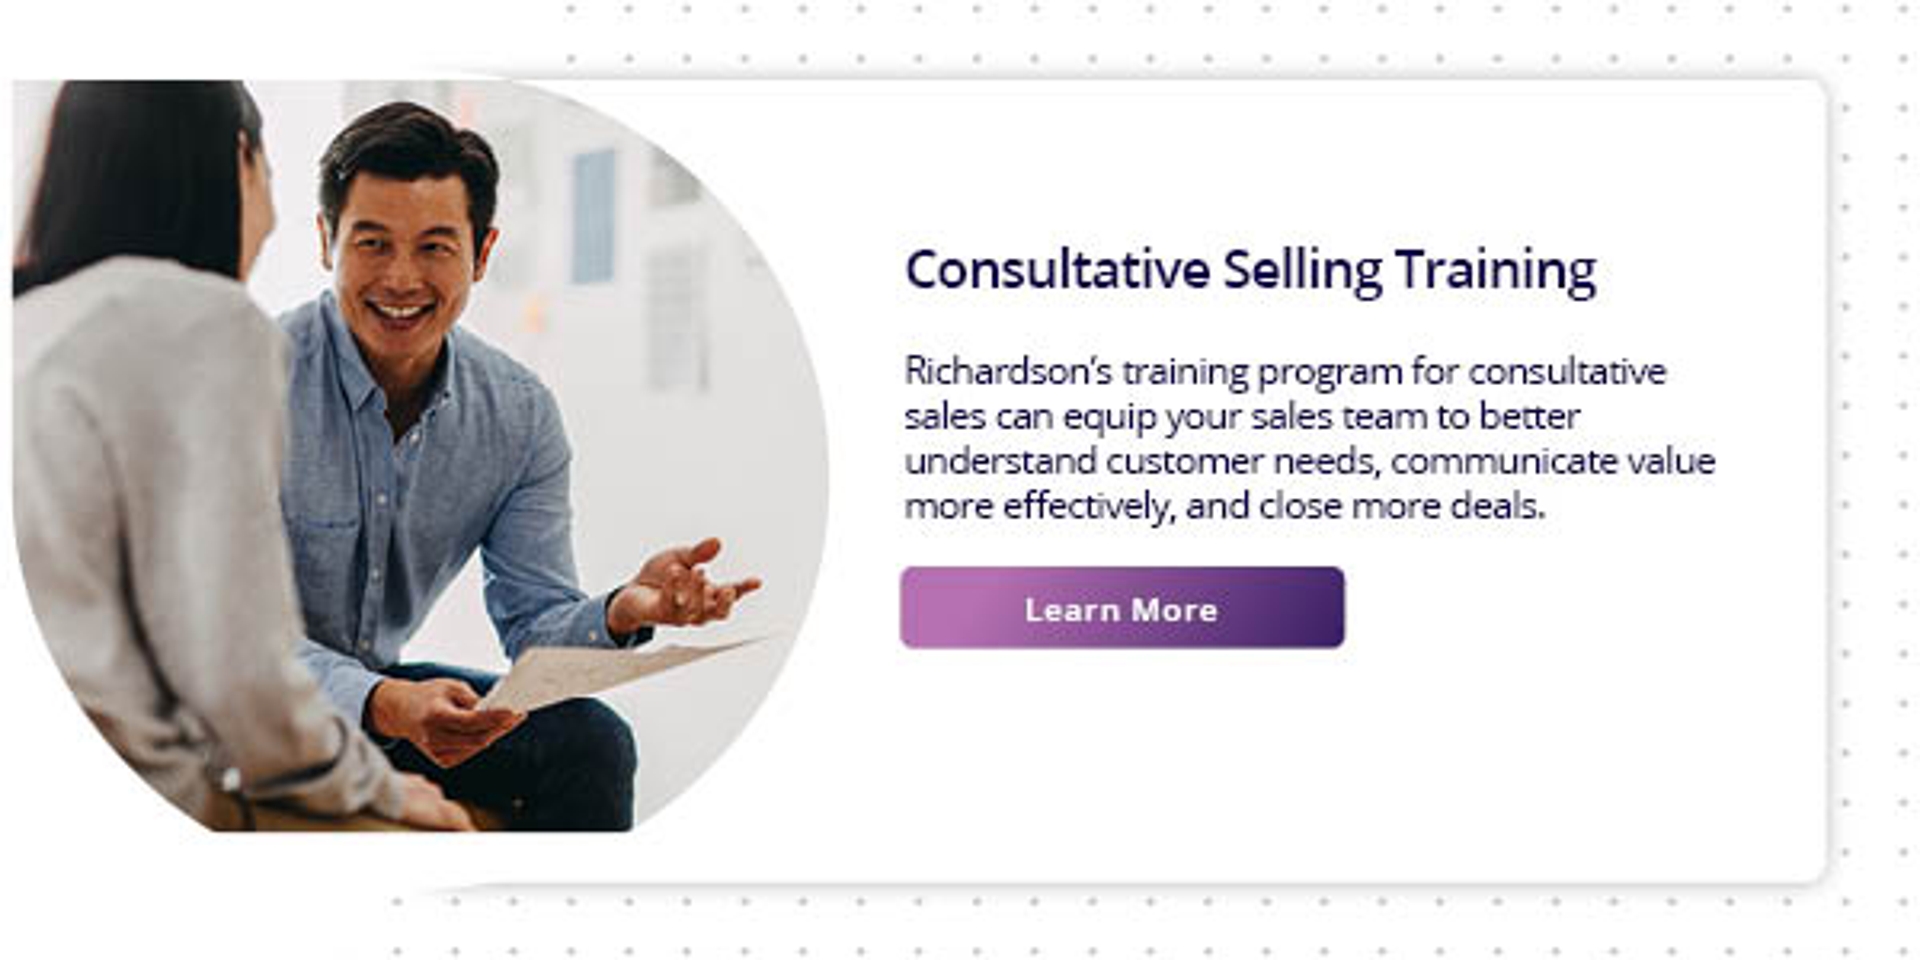 click here to learn about the consultative selling training program